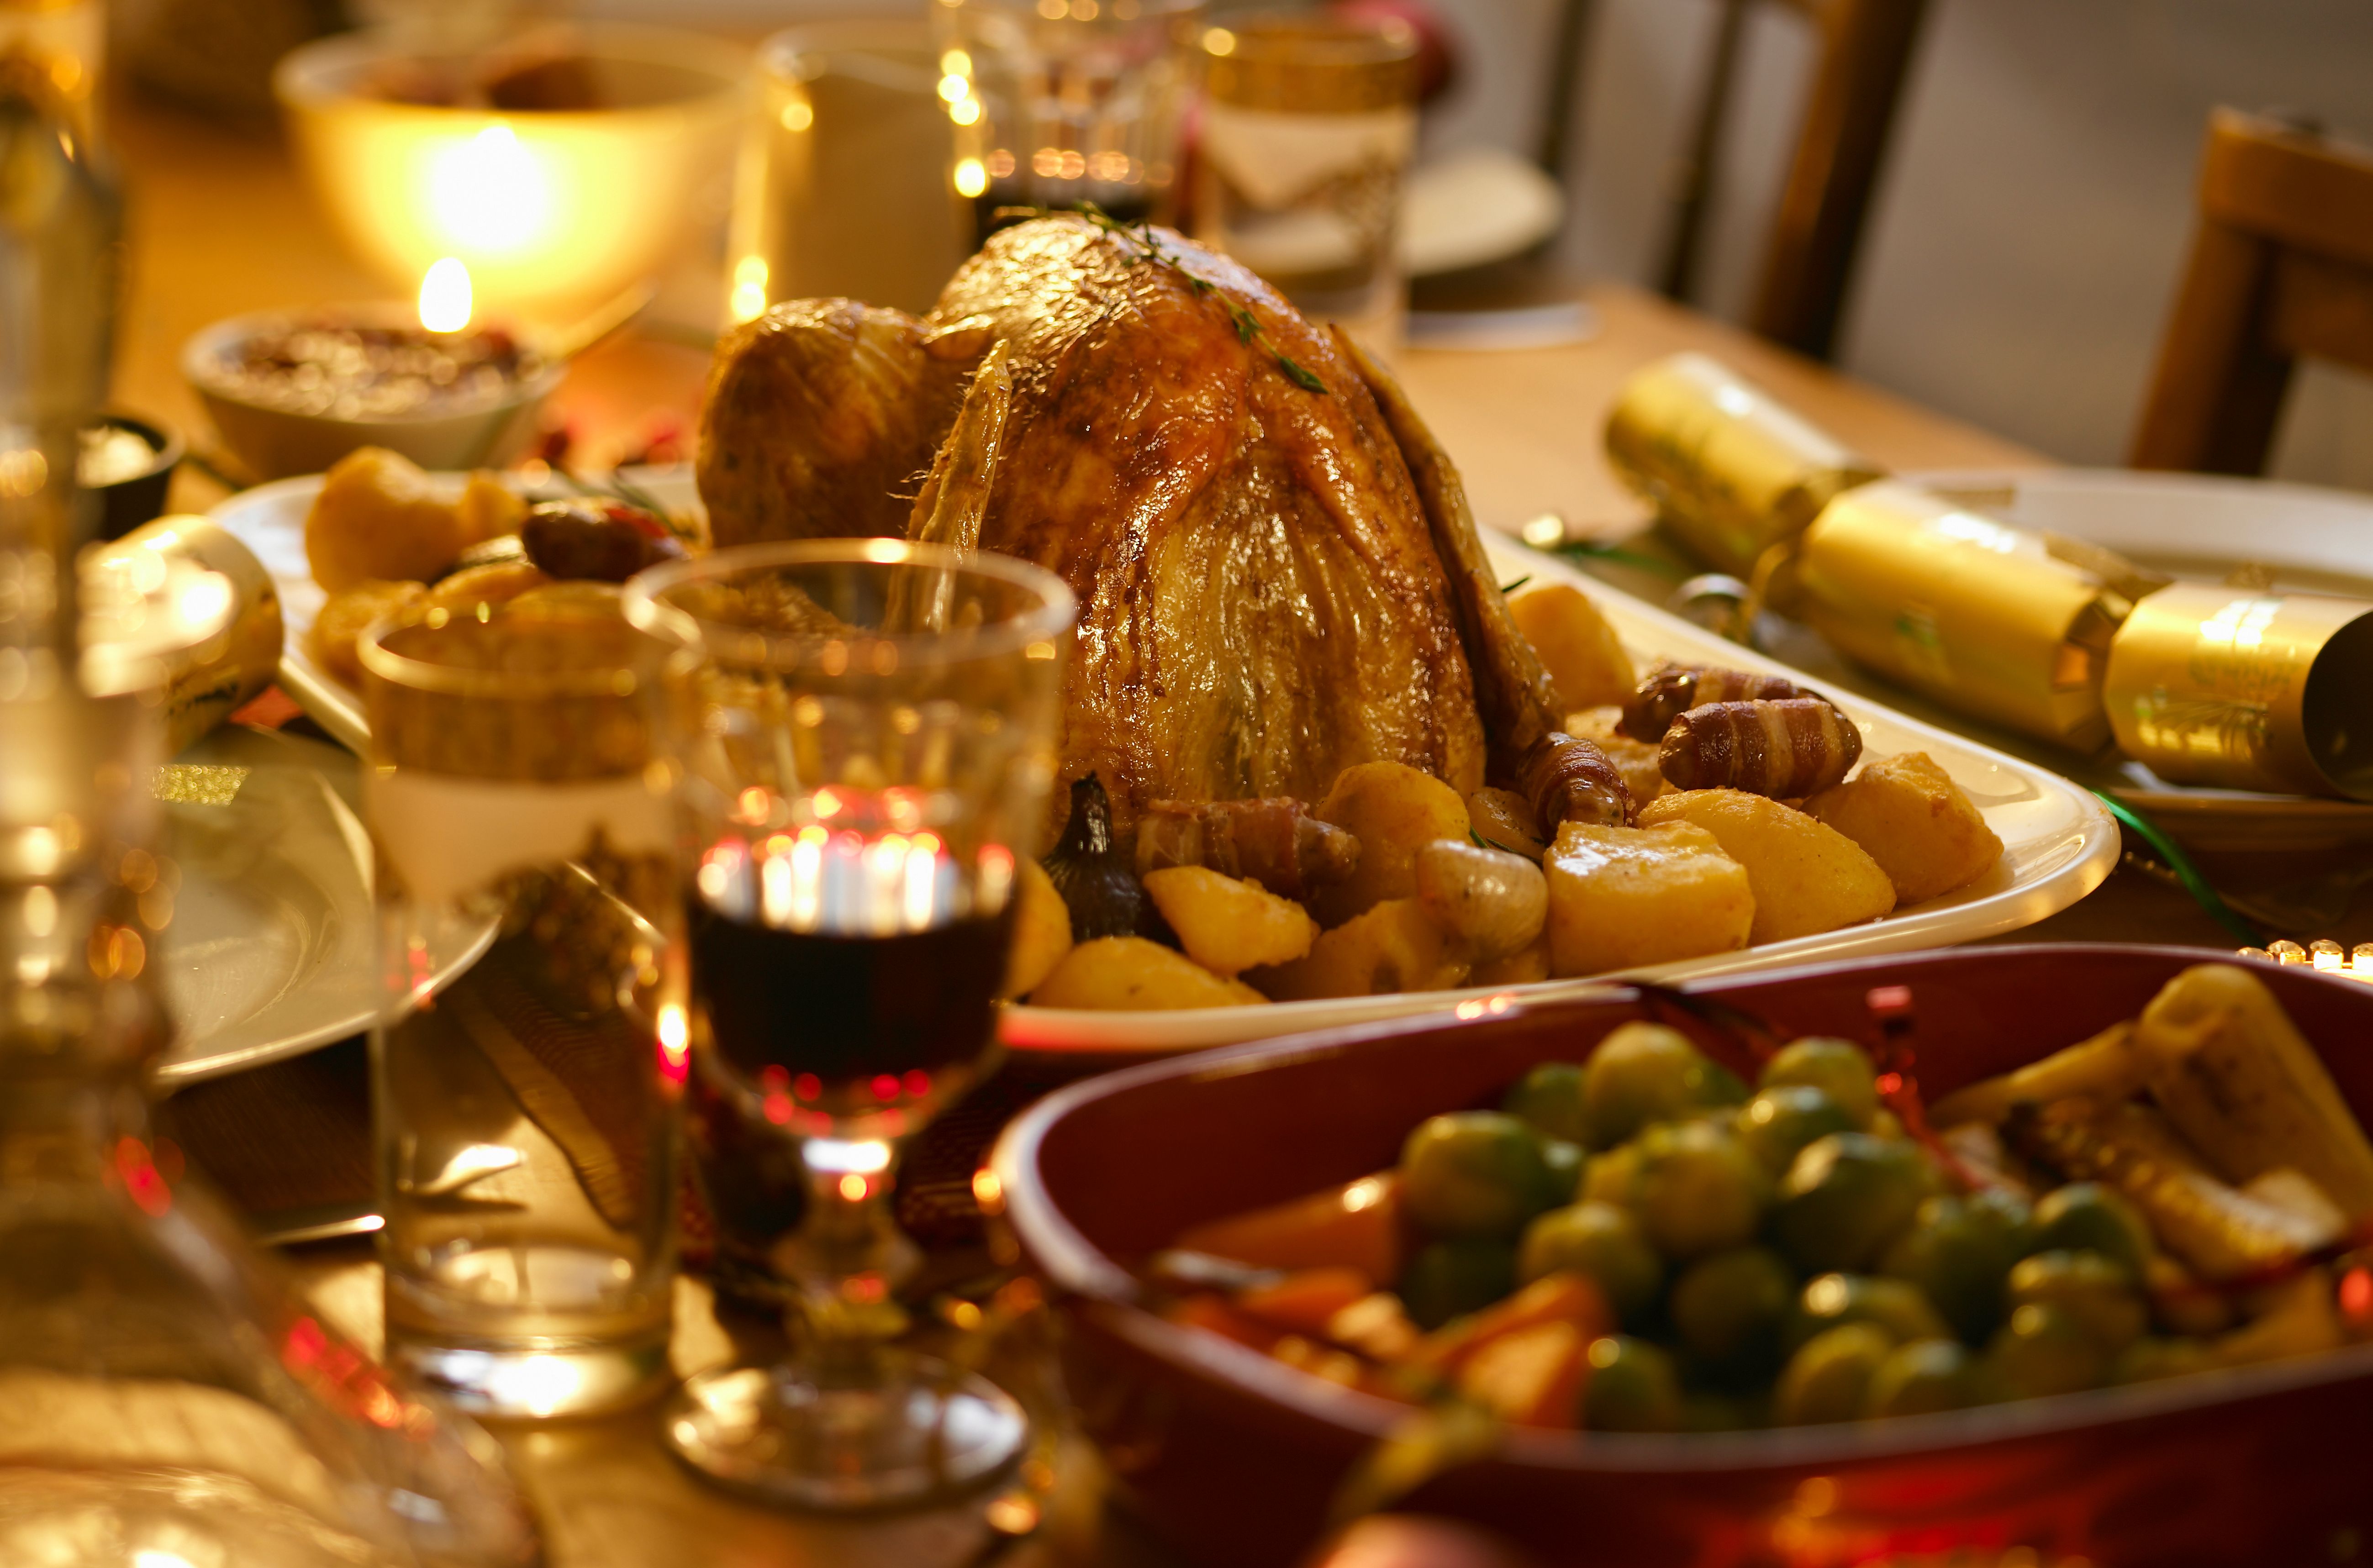 Roast turkey on a dinner table. | Source: Getty Images